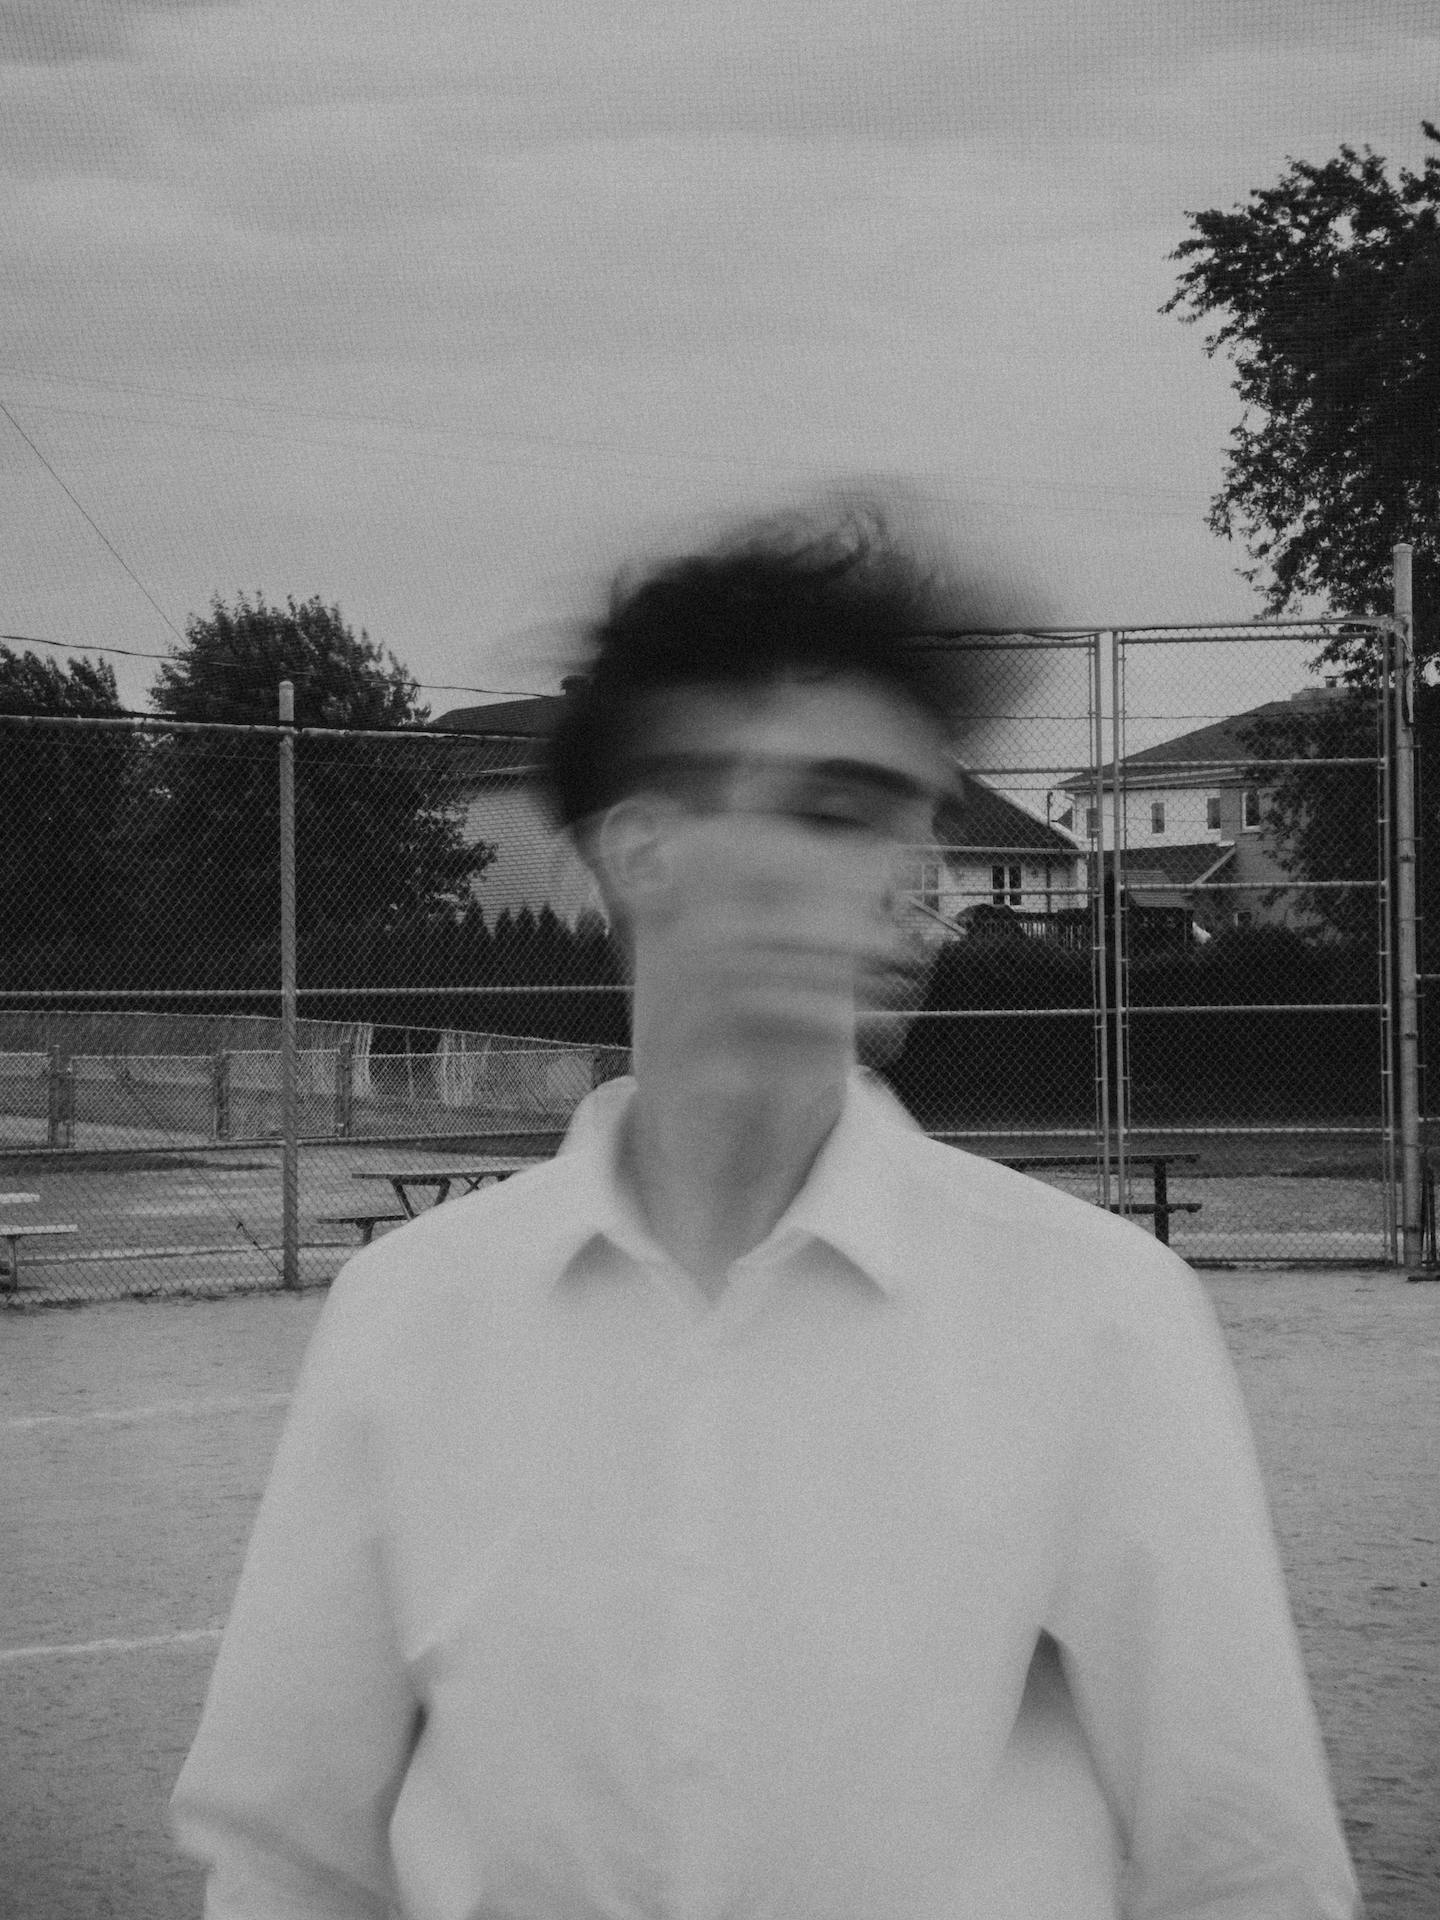 a blurred black and white image of a man shaking his head